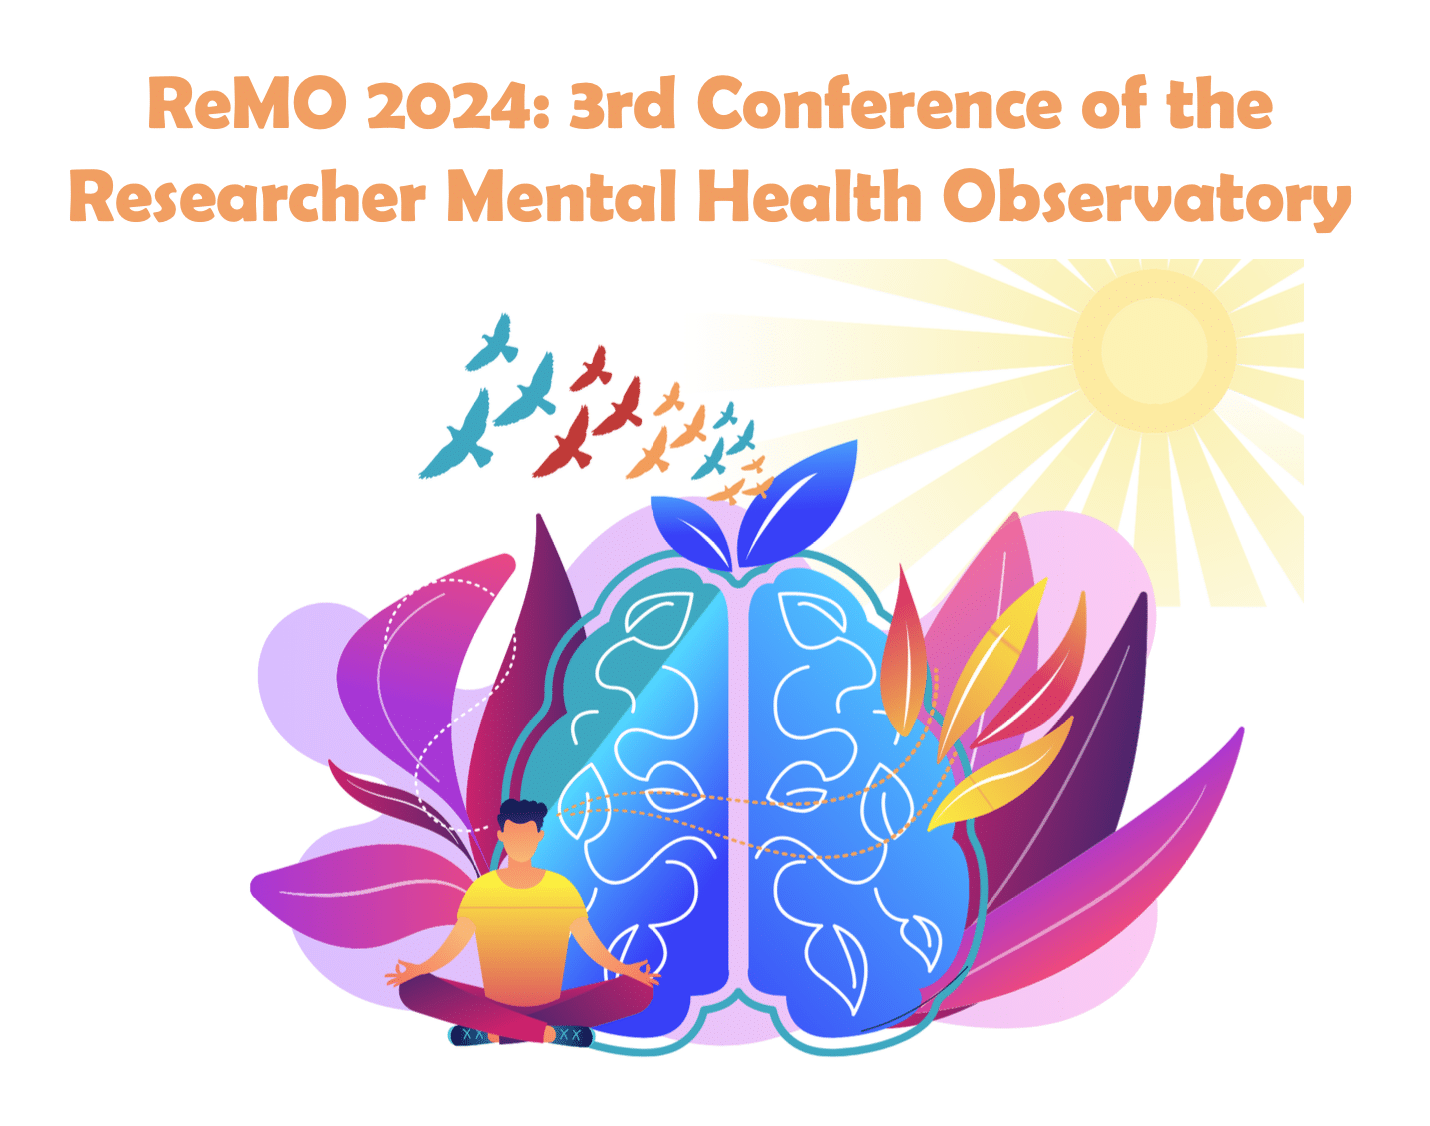 Remo 2024 conference Researcher Mental Health observatory image